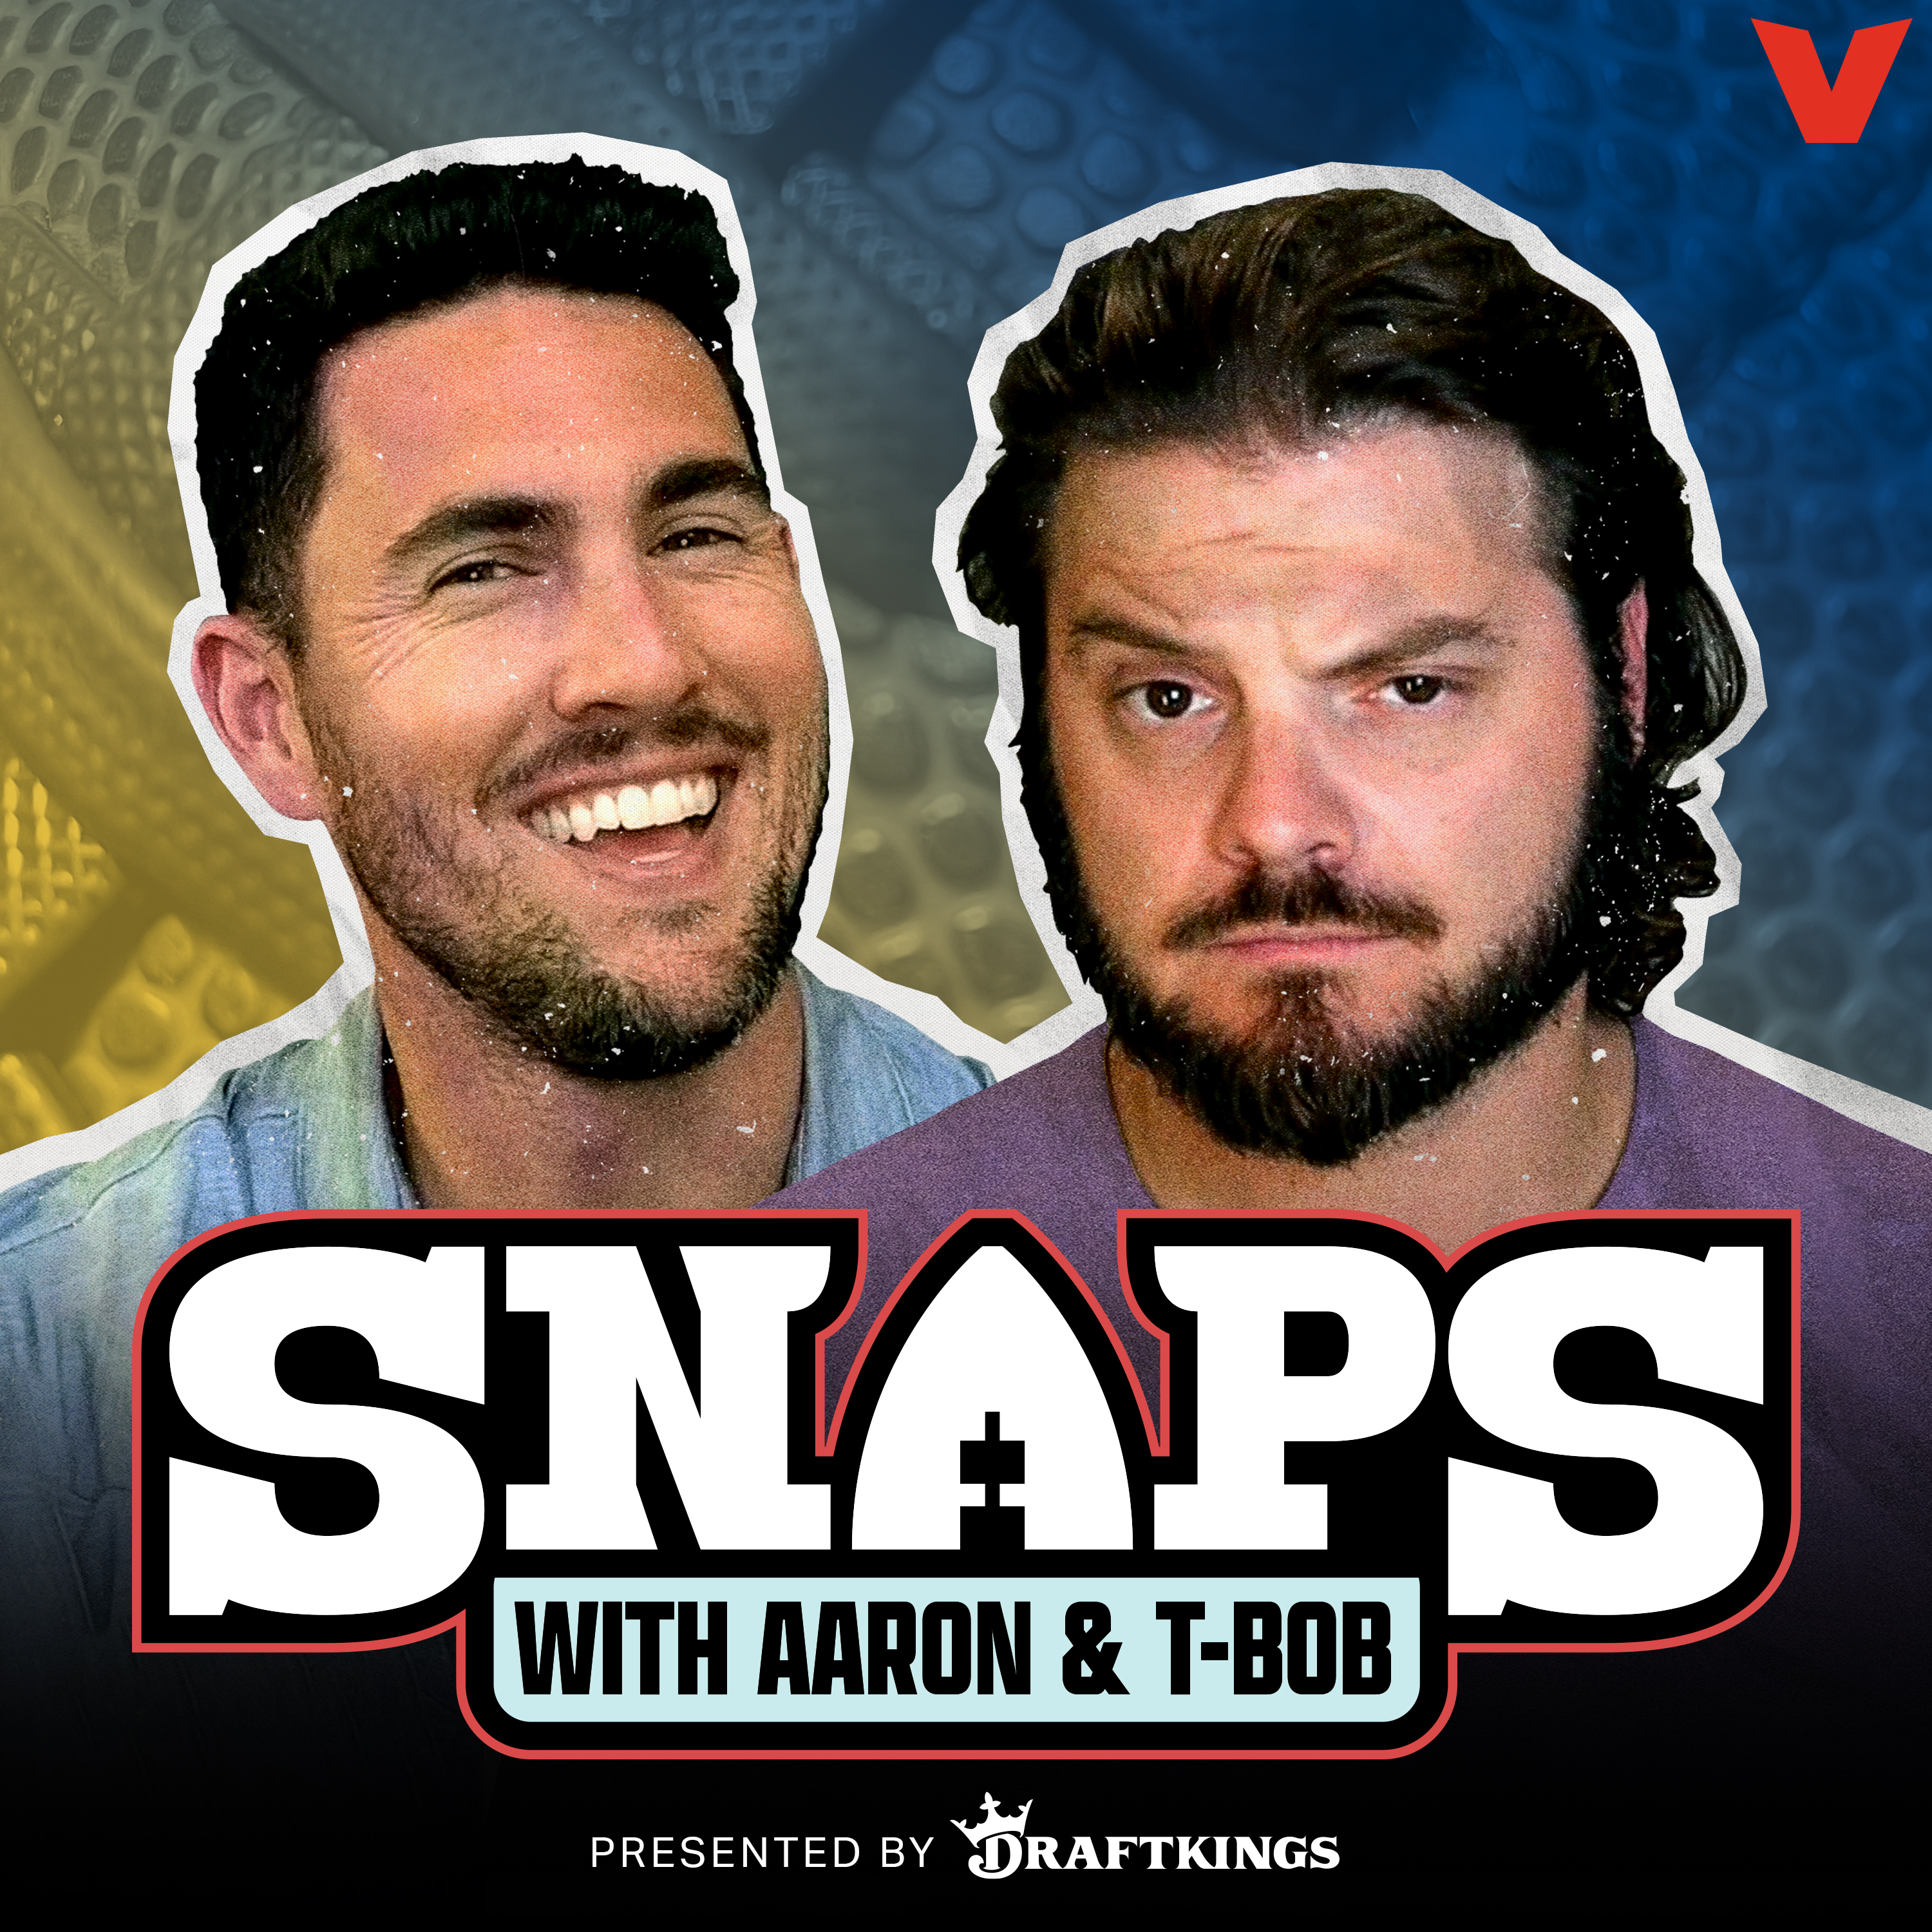 Snaps - Will Lincoln Riley create a dynasty at USC? + Big 12 gets weird